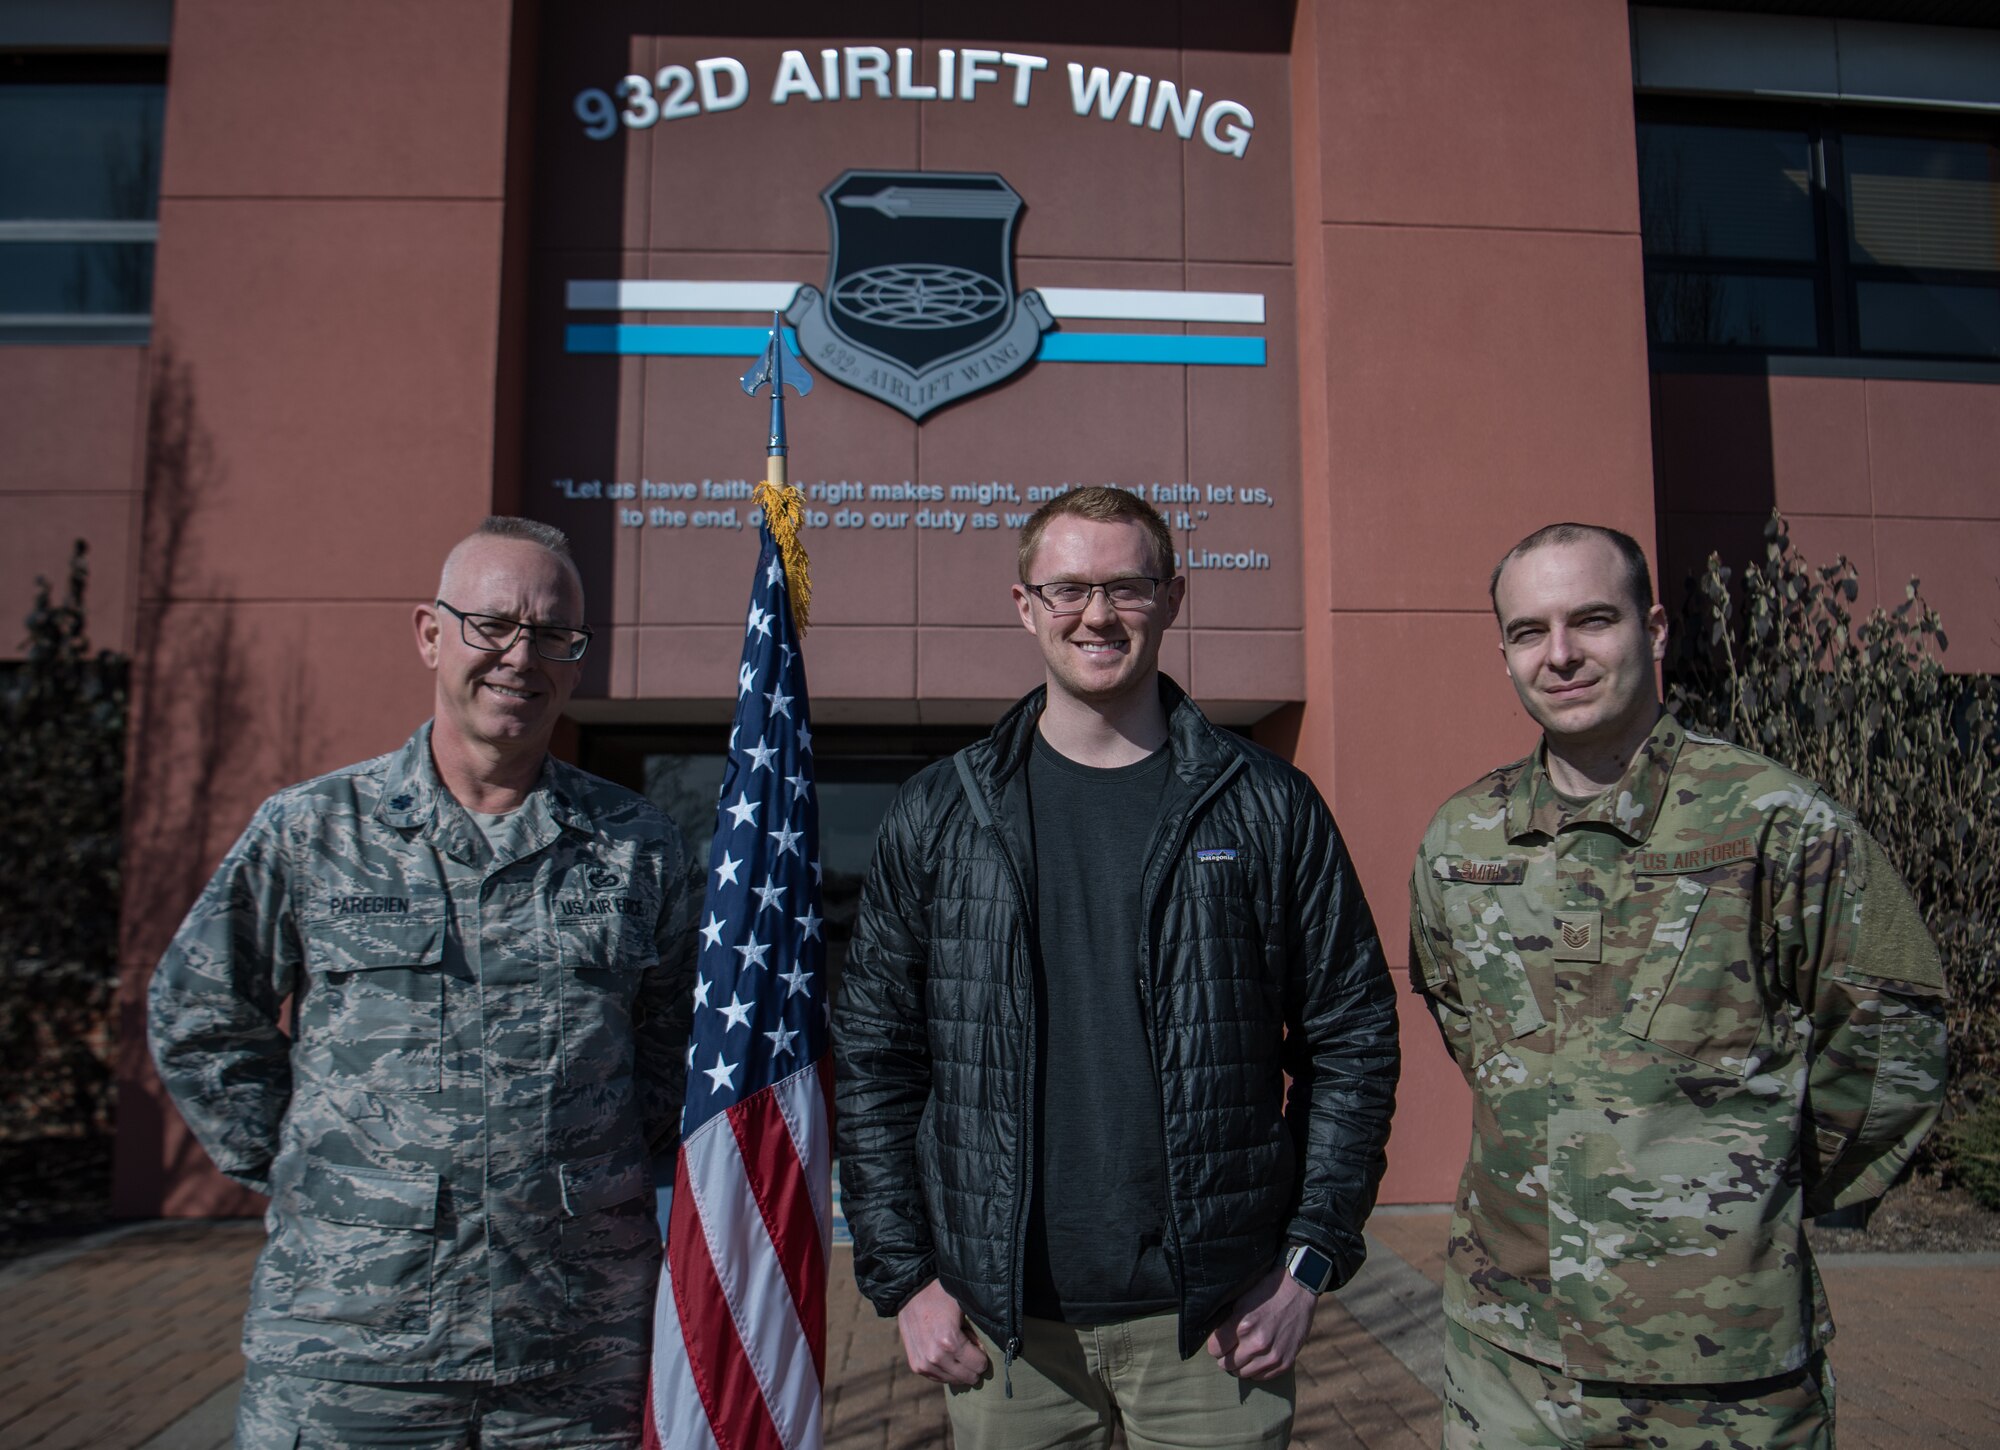 New Air Force citizen Airman, Casey Earl, center, poses with Air Force recruiter, Tech. Sgt. Michael Smith, right, and  Lt. Col.Stan Paregien, 932nd Airlift Wing Public Affairs Officer, following Earl's oath of enlistment, Feb. 25, 2019, Scott Air Force Base, Illinois. Earl looks forward to getting through all the training and certifications for cyber operations and then getting in and doing the job. (U.S. Air Force photo by Christopher Parr)